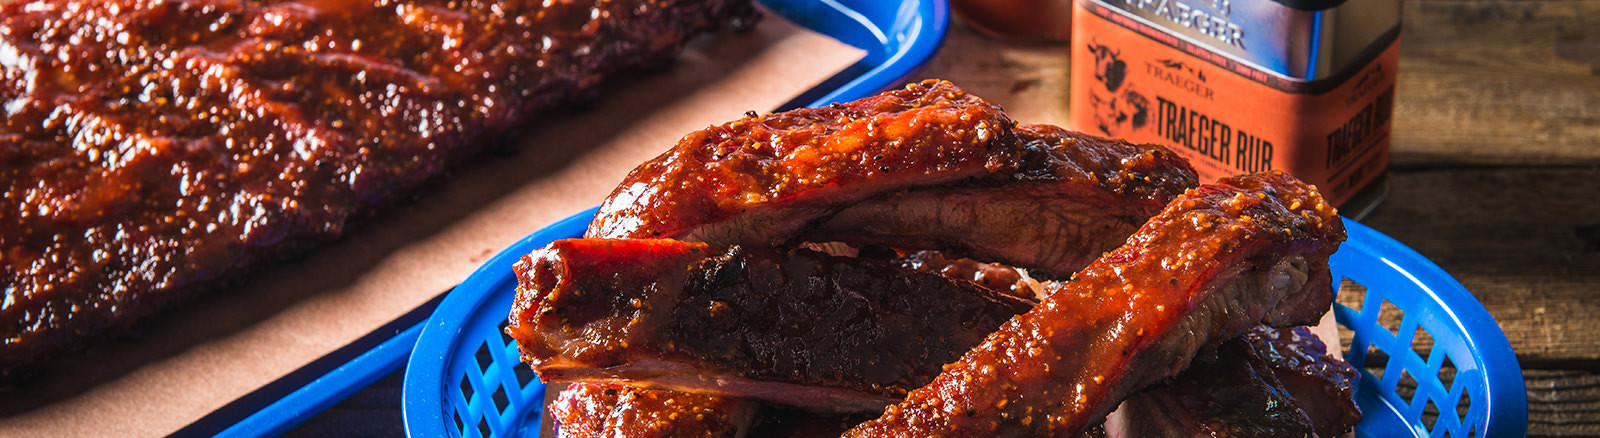 St Louis Bbq Sauce
 St Louis Style BBQ Ribs with Texas Spicy BBQ Sauce Recipe